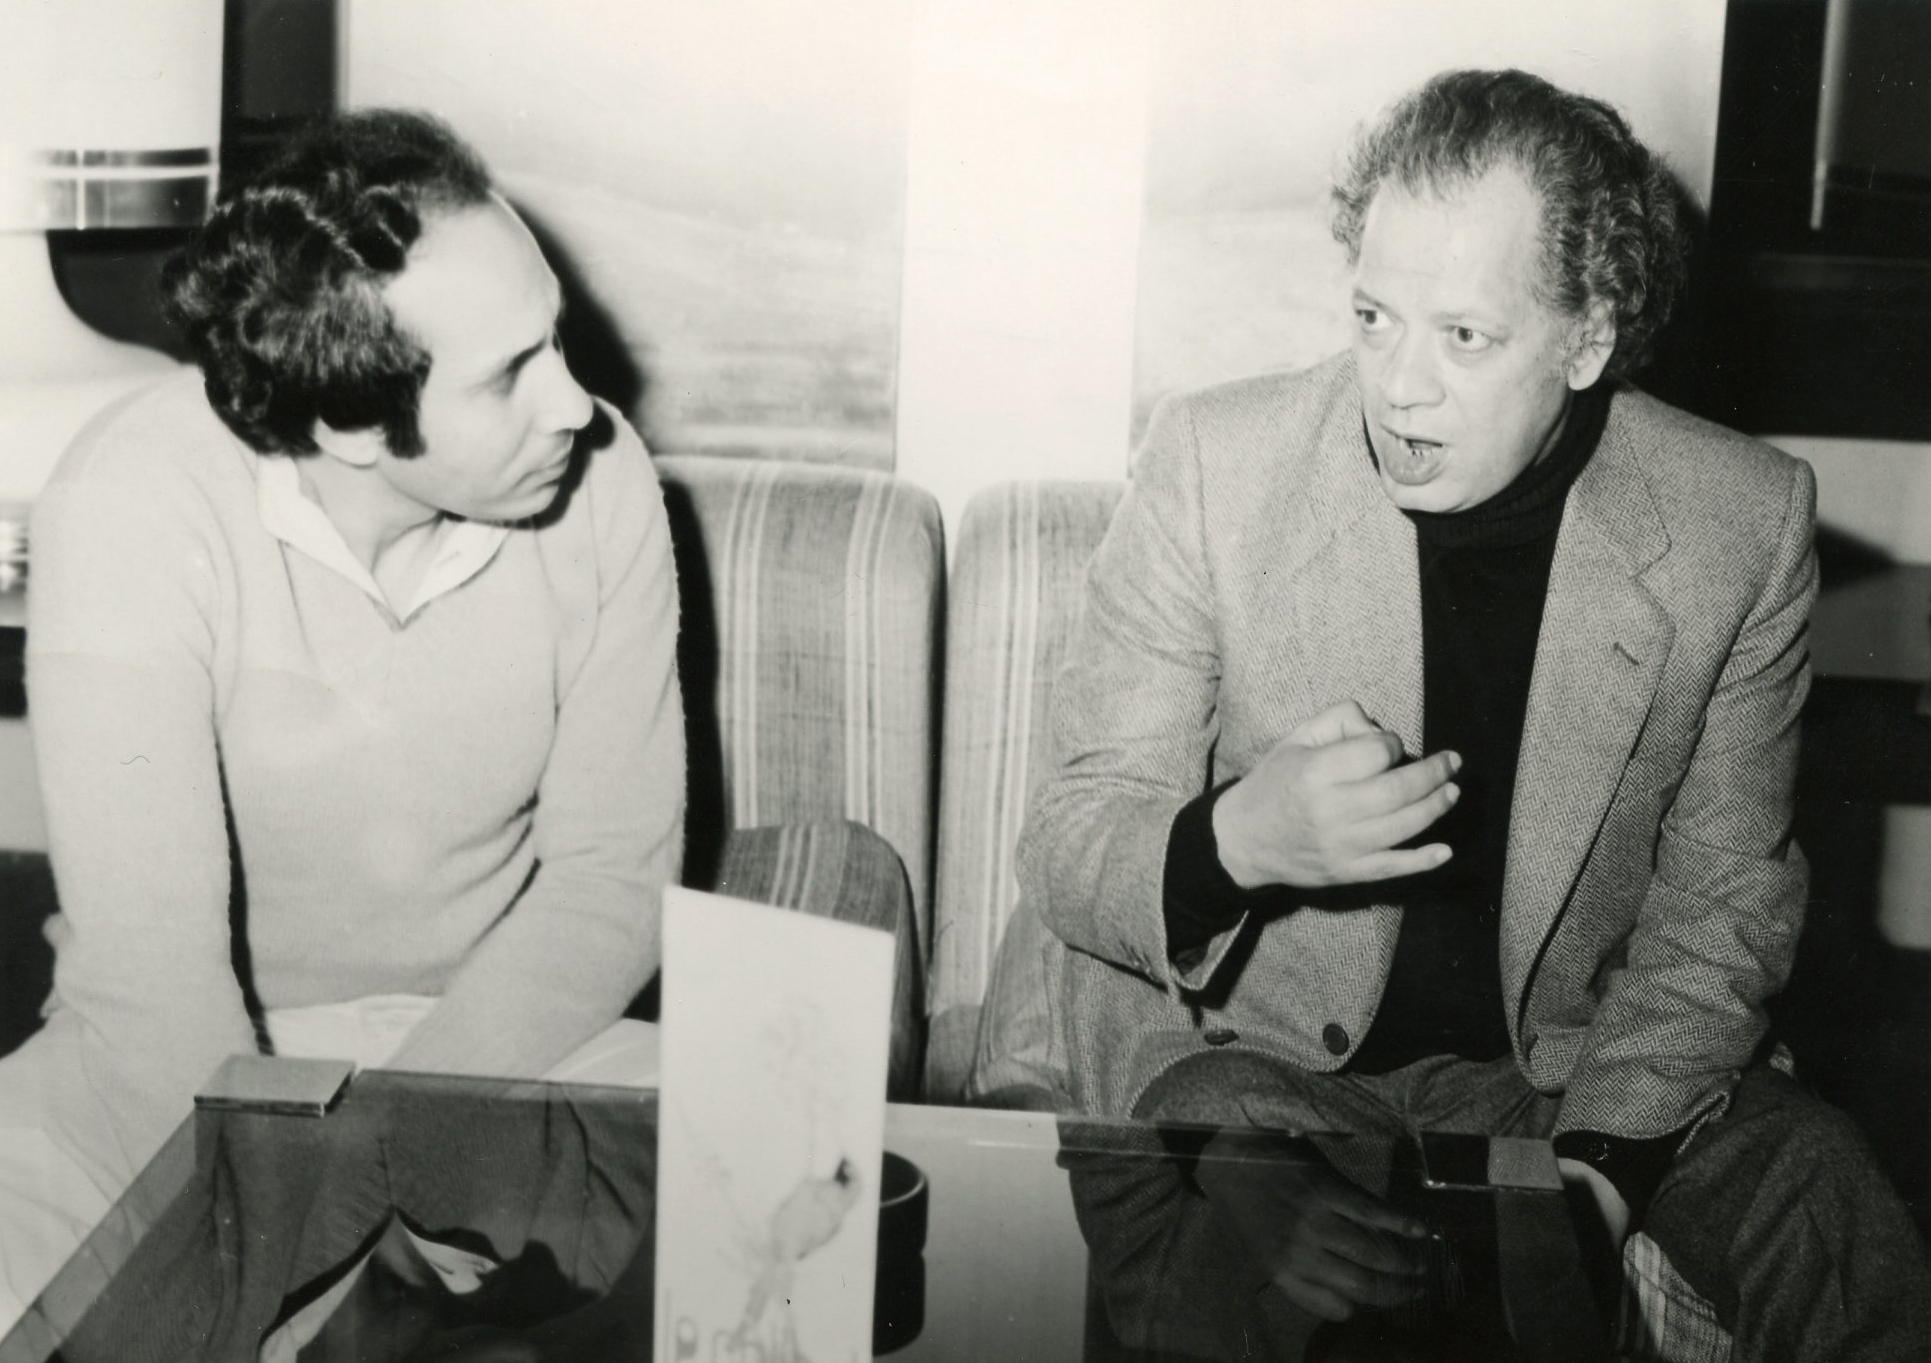 In Tunisia in 1978 interviewing at length Lotfy Khouly, ousted editor-in-chief of Cairo's shut down 'leftist' monthly magazine 'Al Tali'a' where Farouq published articles for 3 years